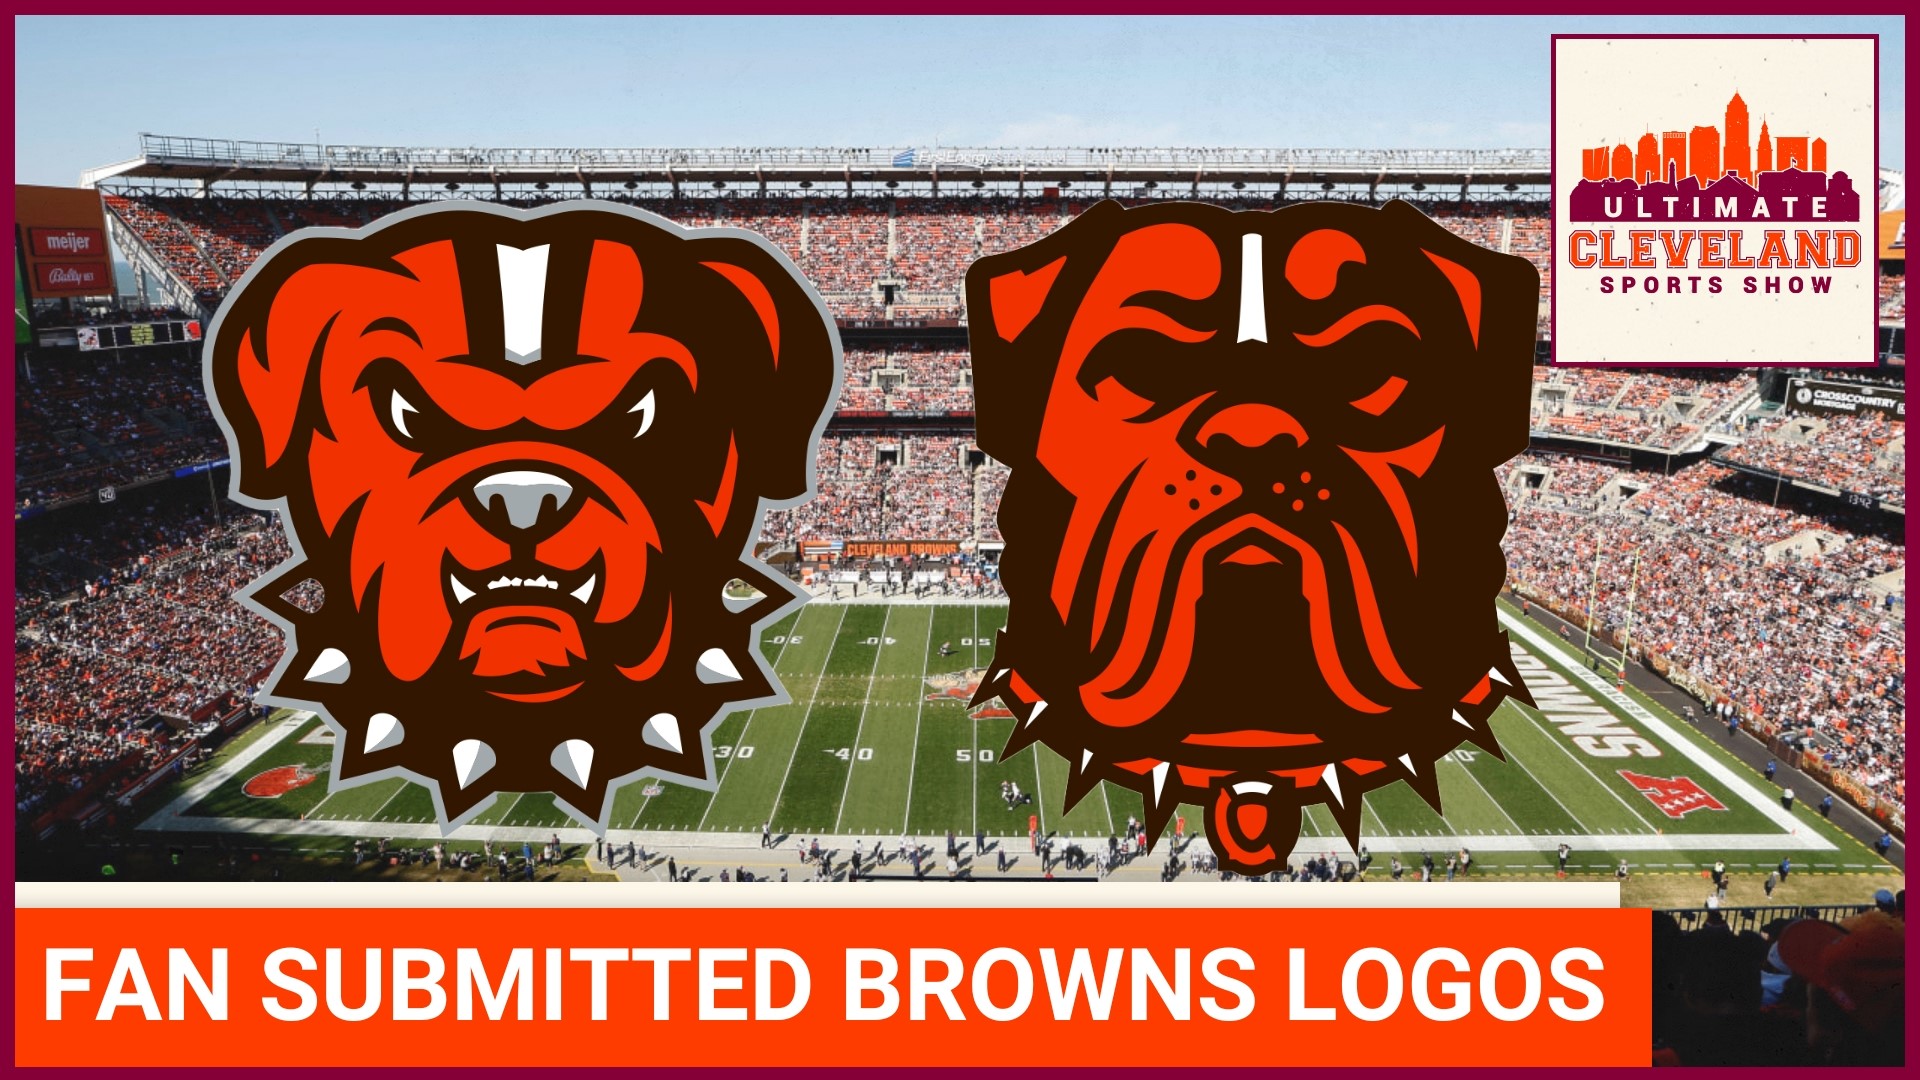 Browns announce the five finalists for the new dog logo